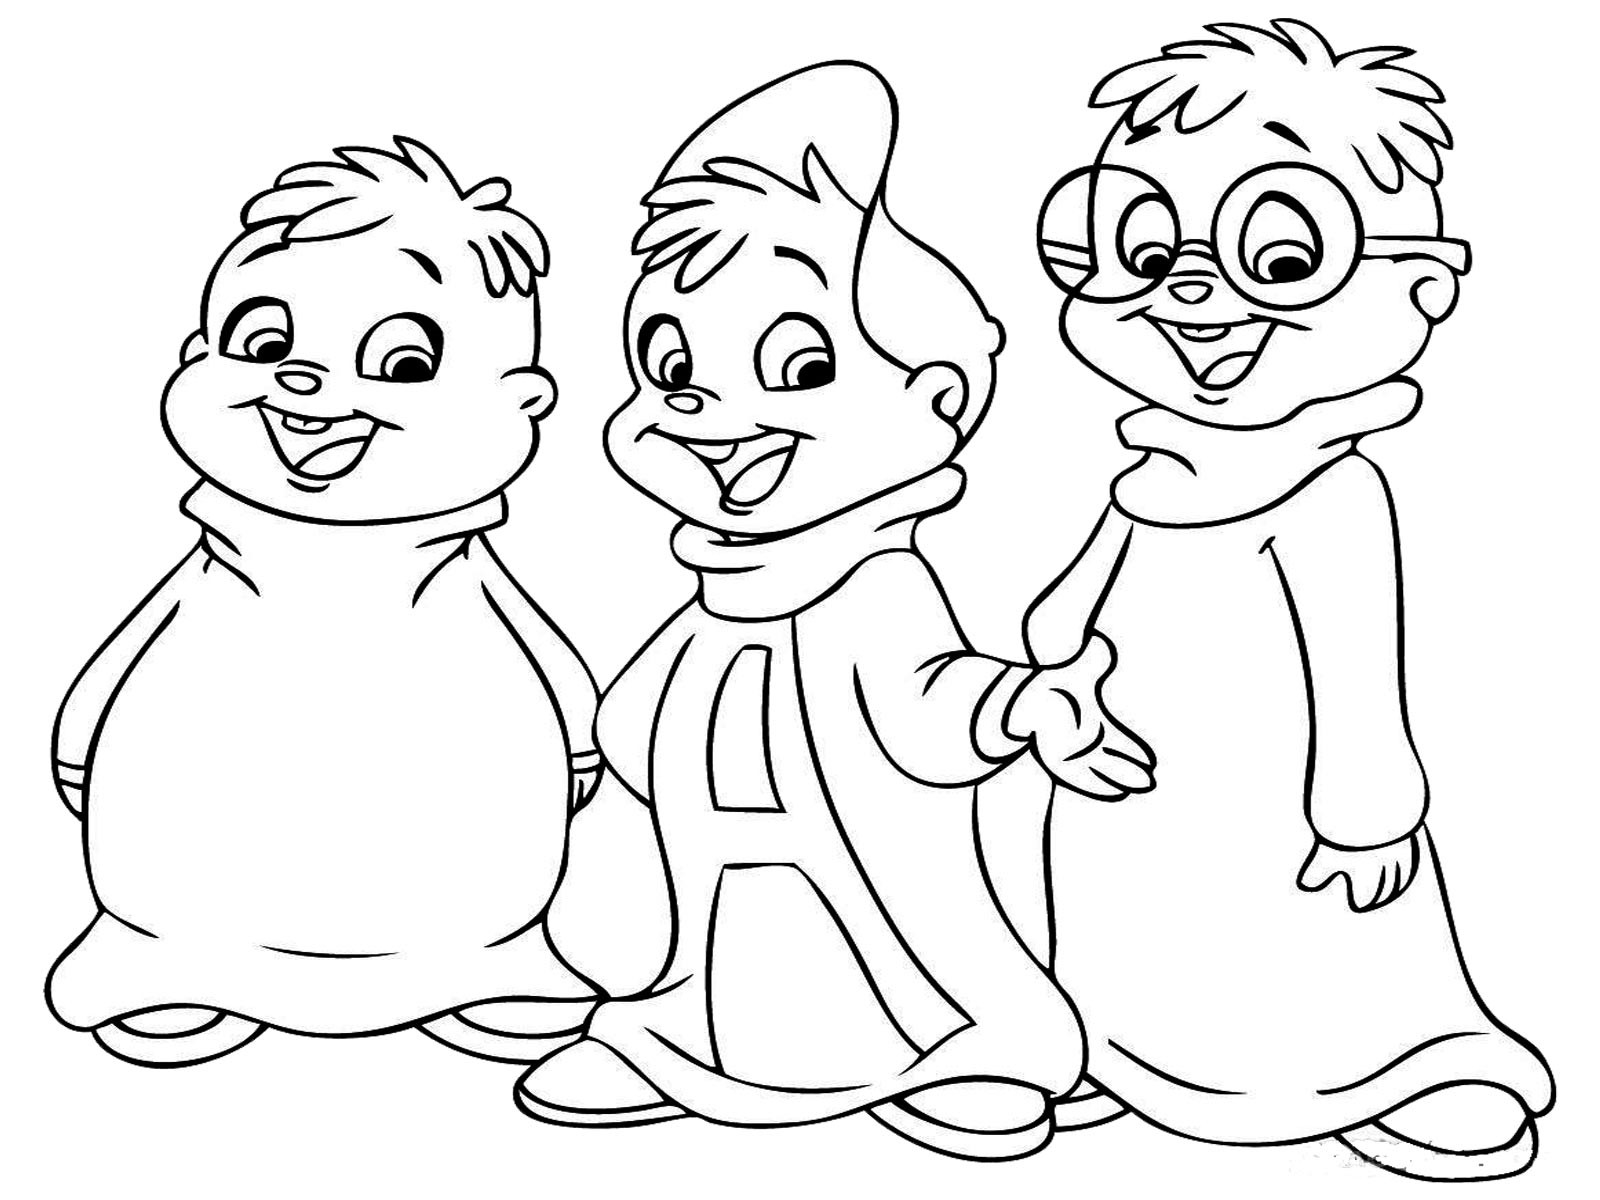 Free Printable Boys Coloring Pages
 Coloring Pages for Boys 2018 Dr Odd